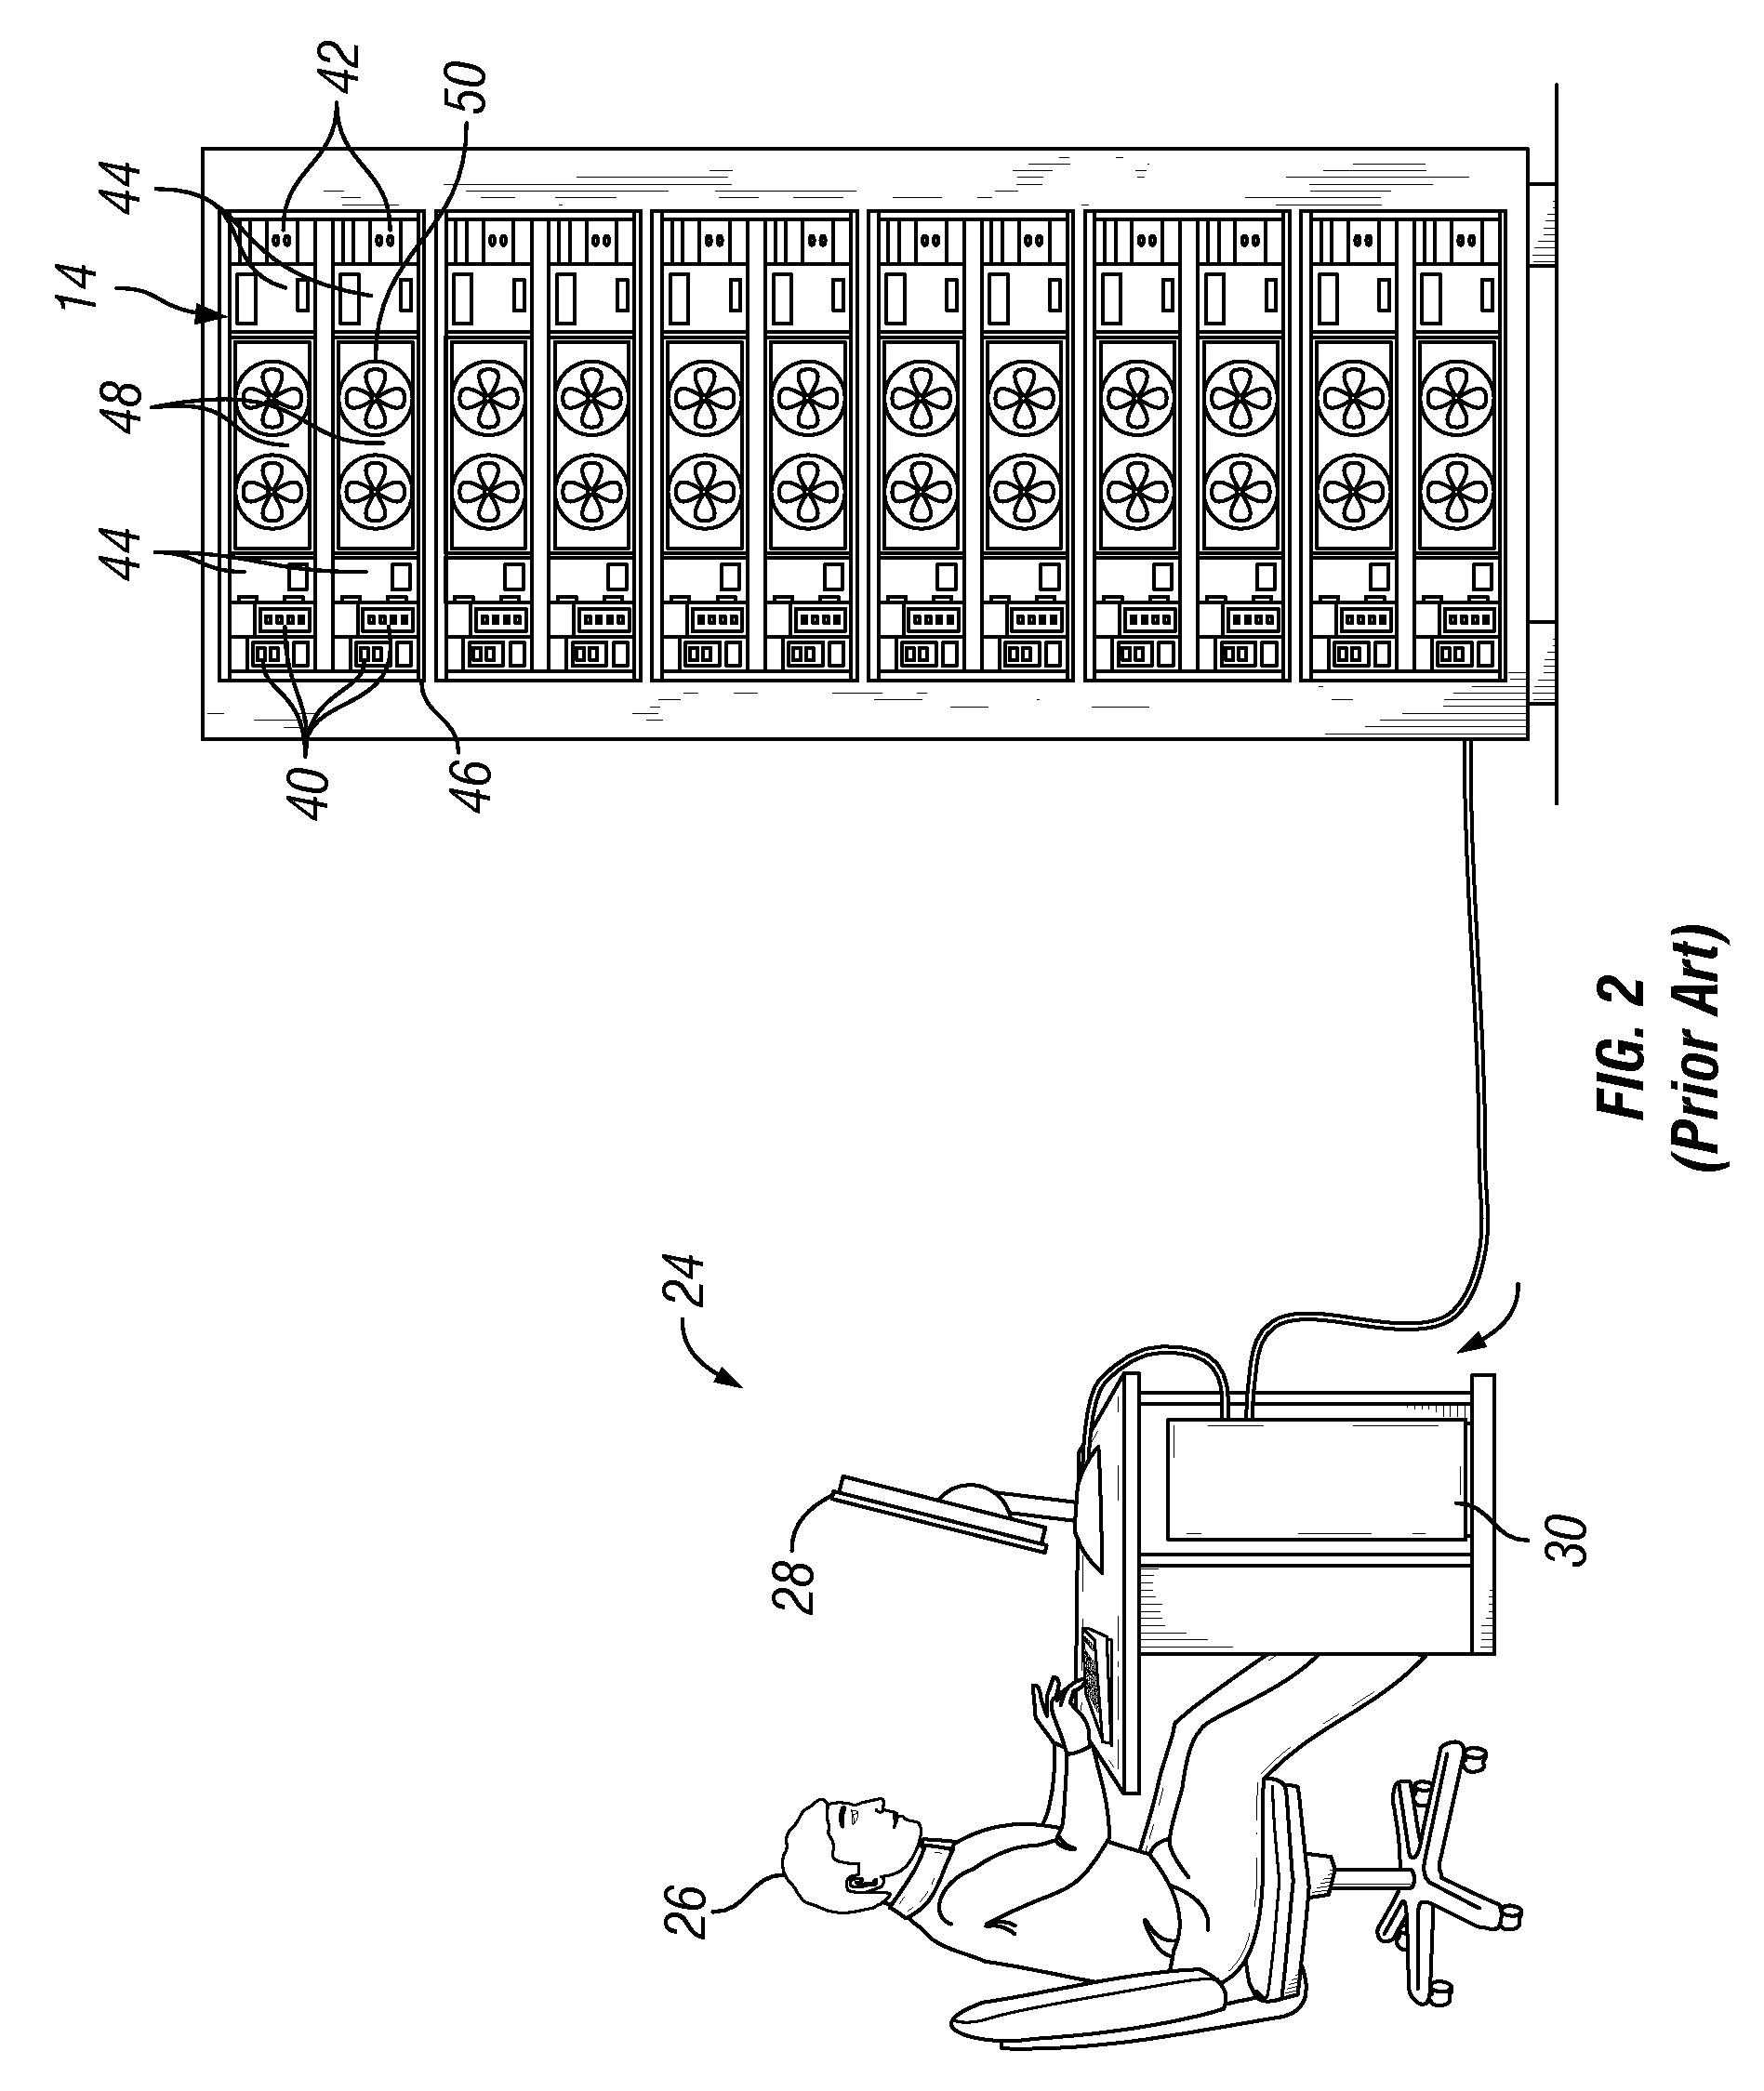 Air-pressure-dependent control of cooling systems using a shared air pressure sensor